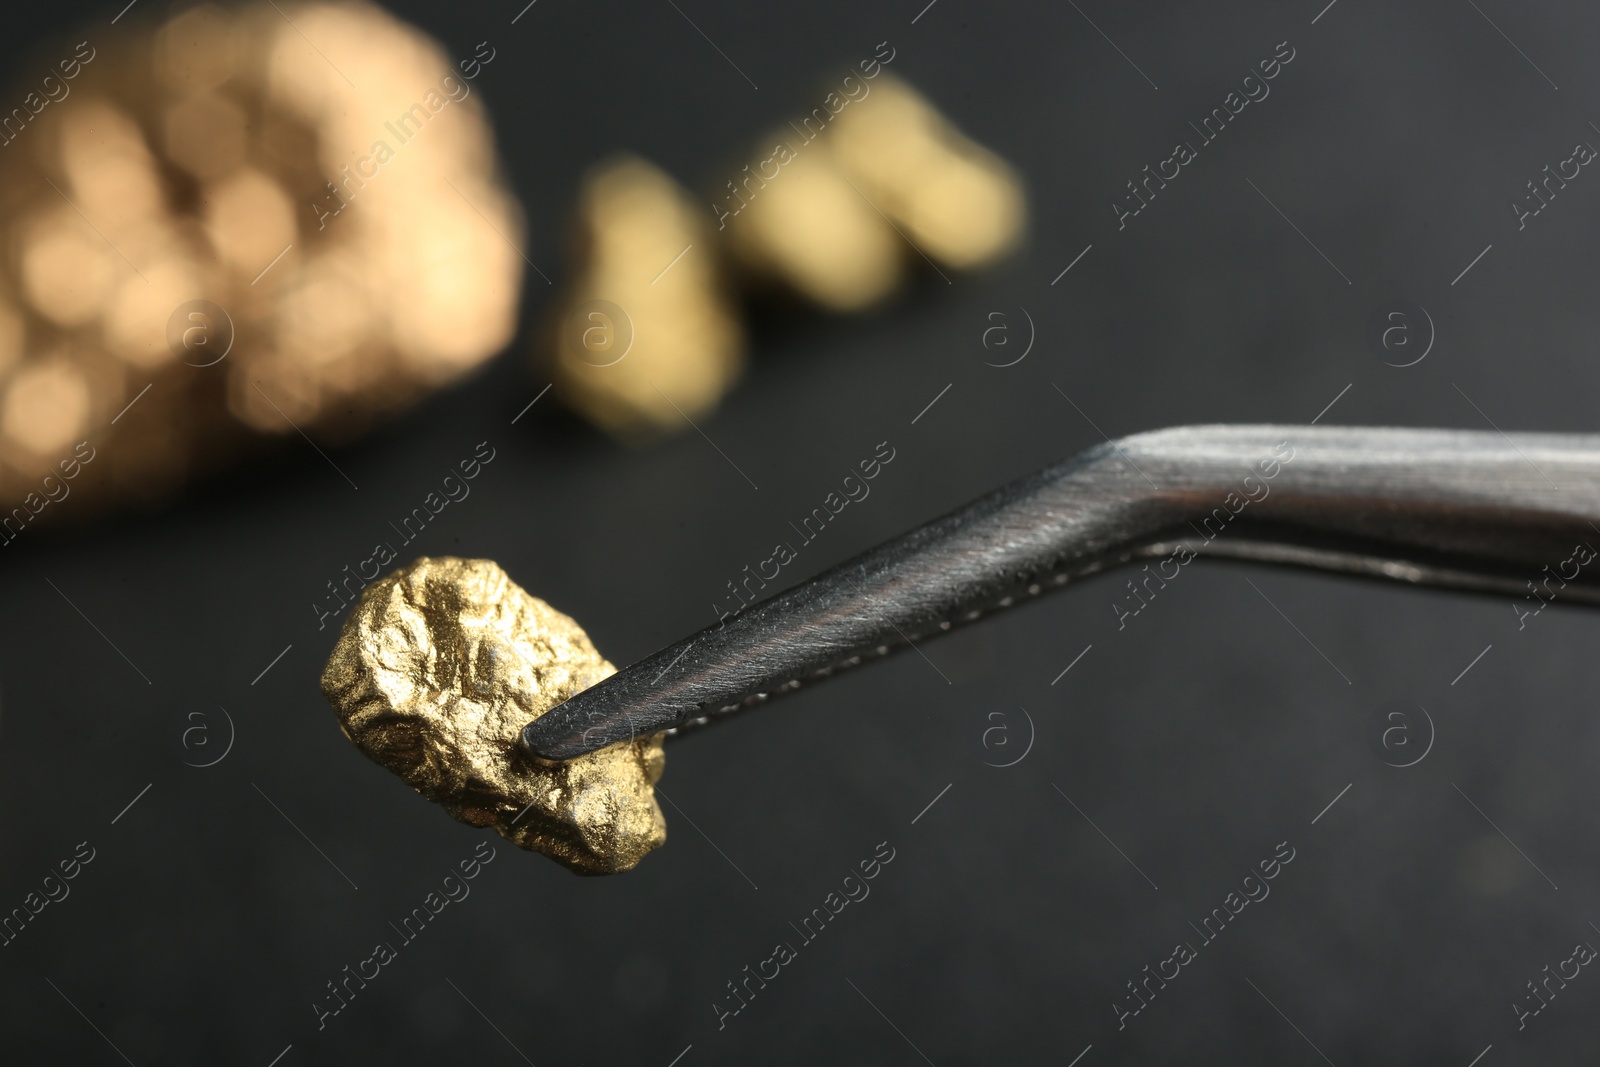 Photo of Tweezer with shiny gold nugget on blurred background, closeup